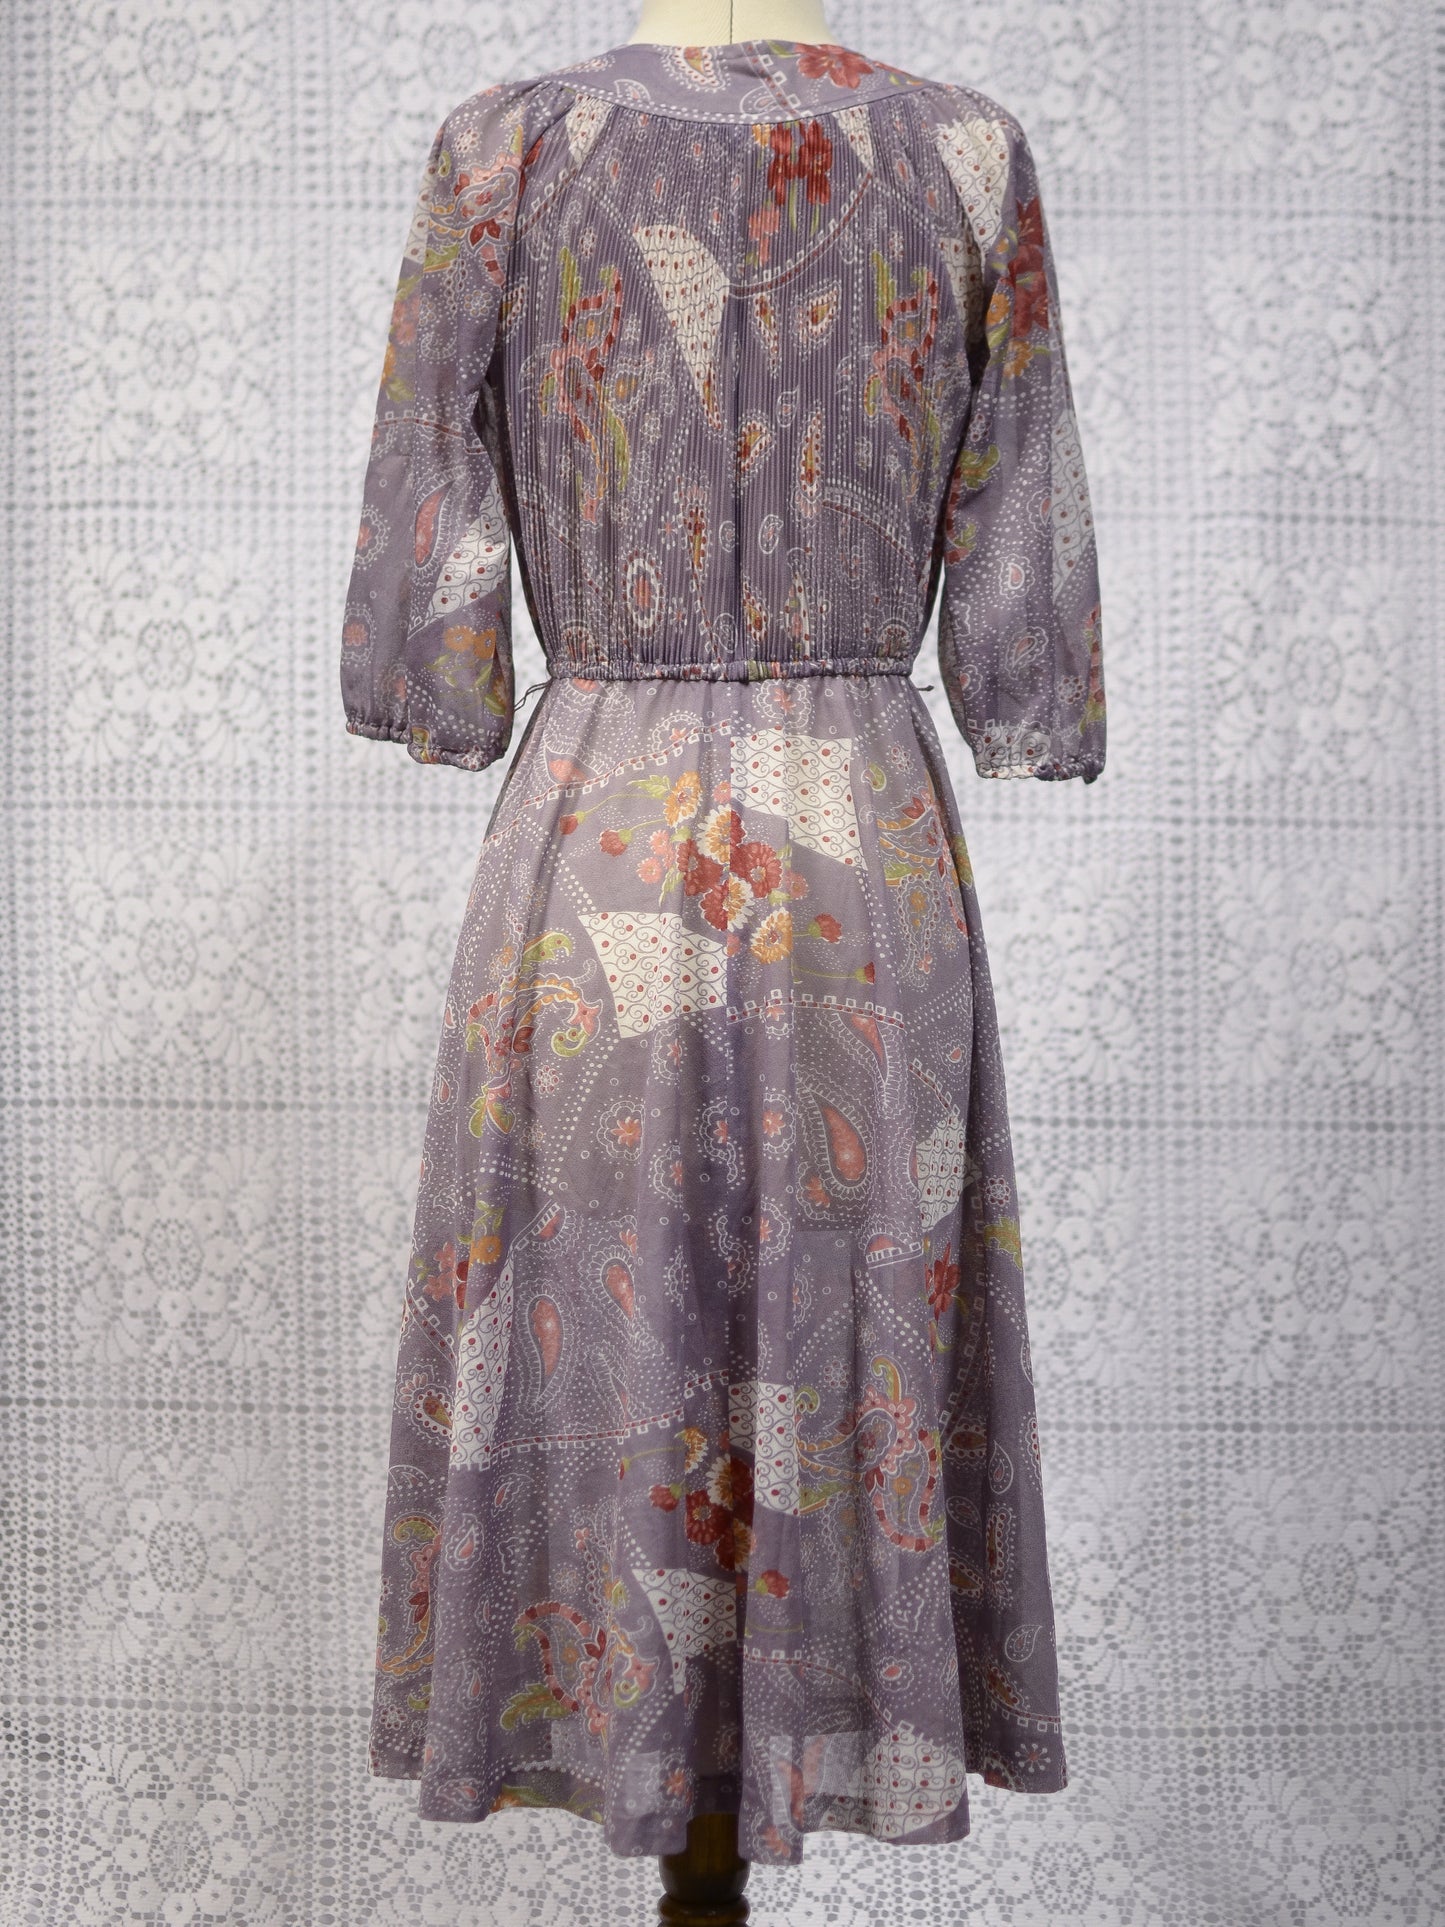 1970s light purple and brown patterned 3/4 length sleeve midi dress